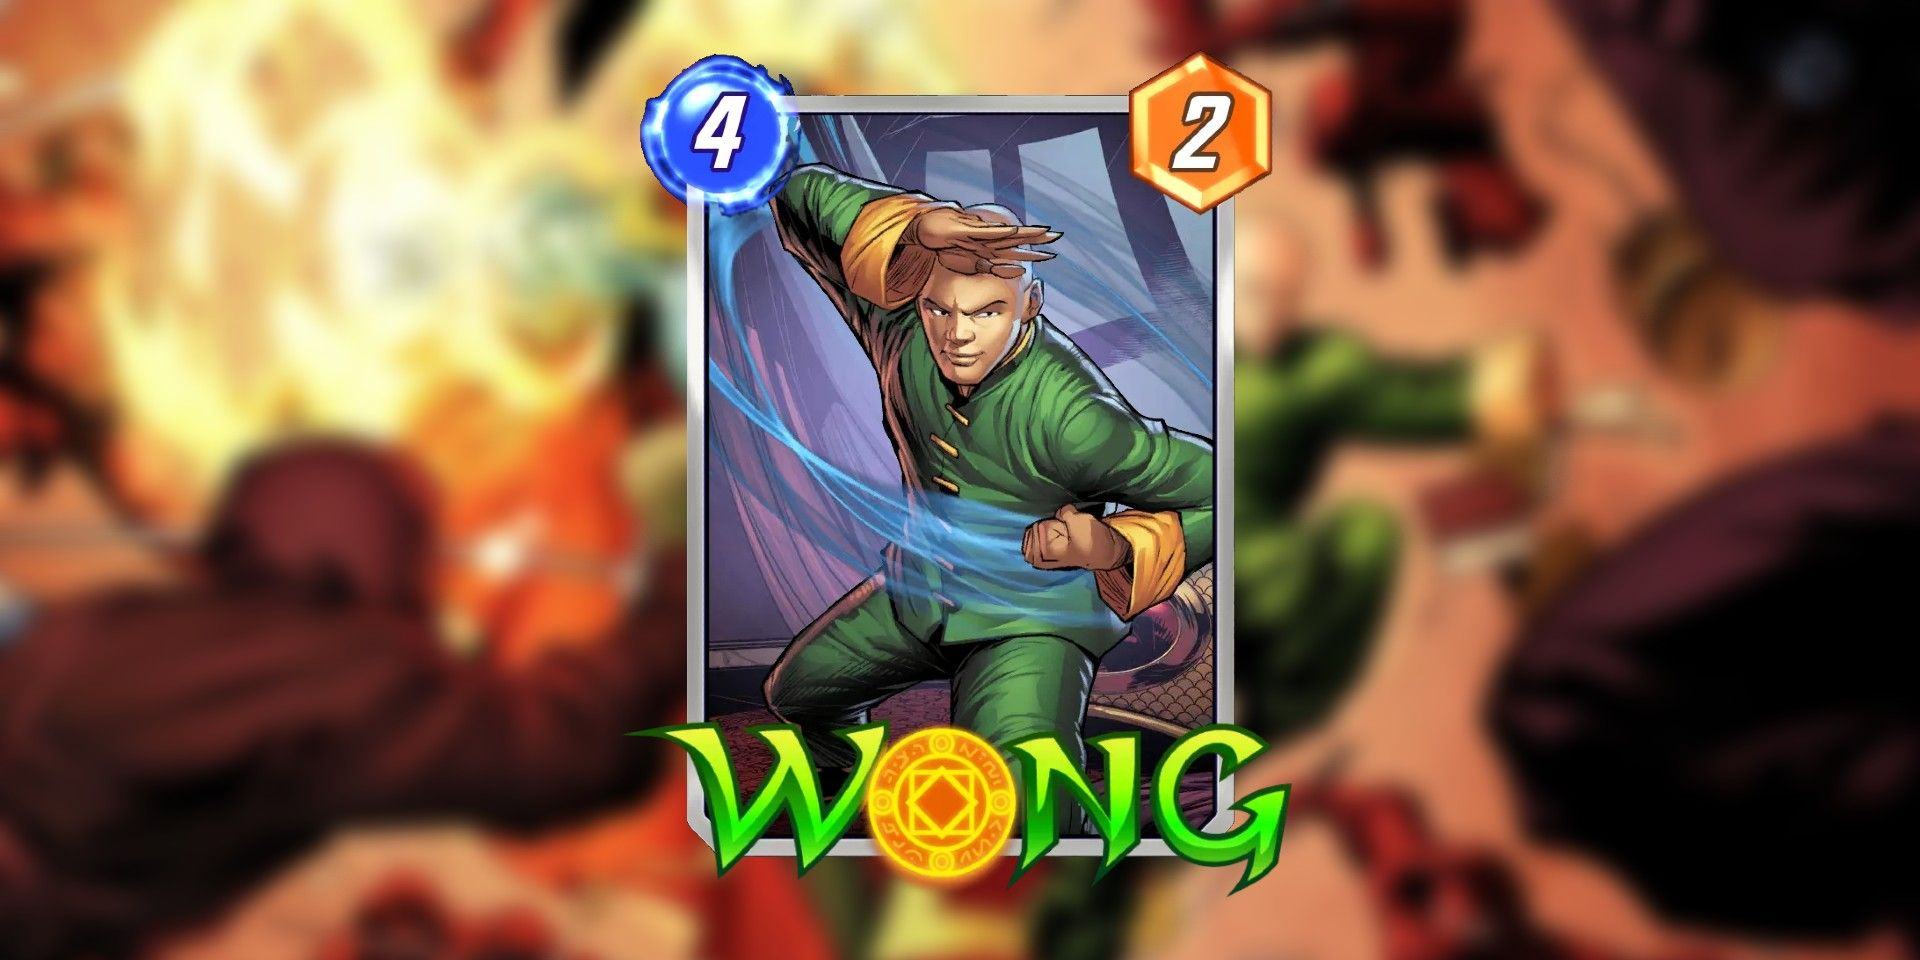 The Wong Card in Marvel Snap